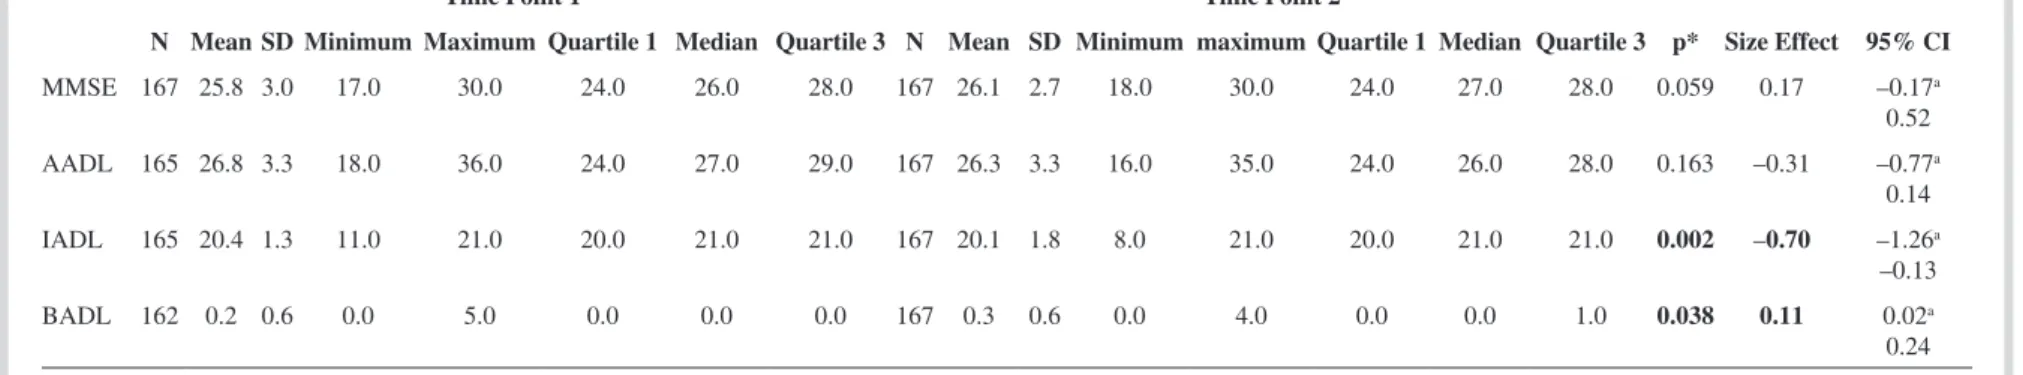 Table 2.  Comparison of the scores in the MMSE, AADL, IADL, and BADL scales between the two investigated time points per gender, educational level and age range.